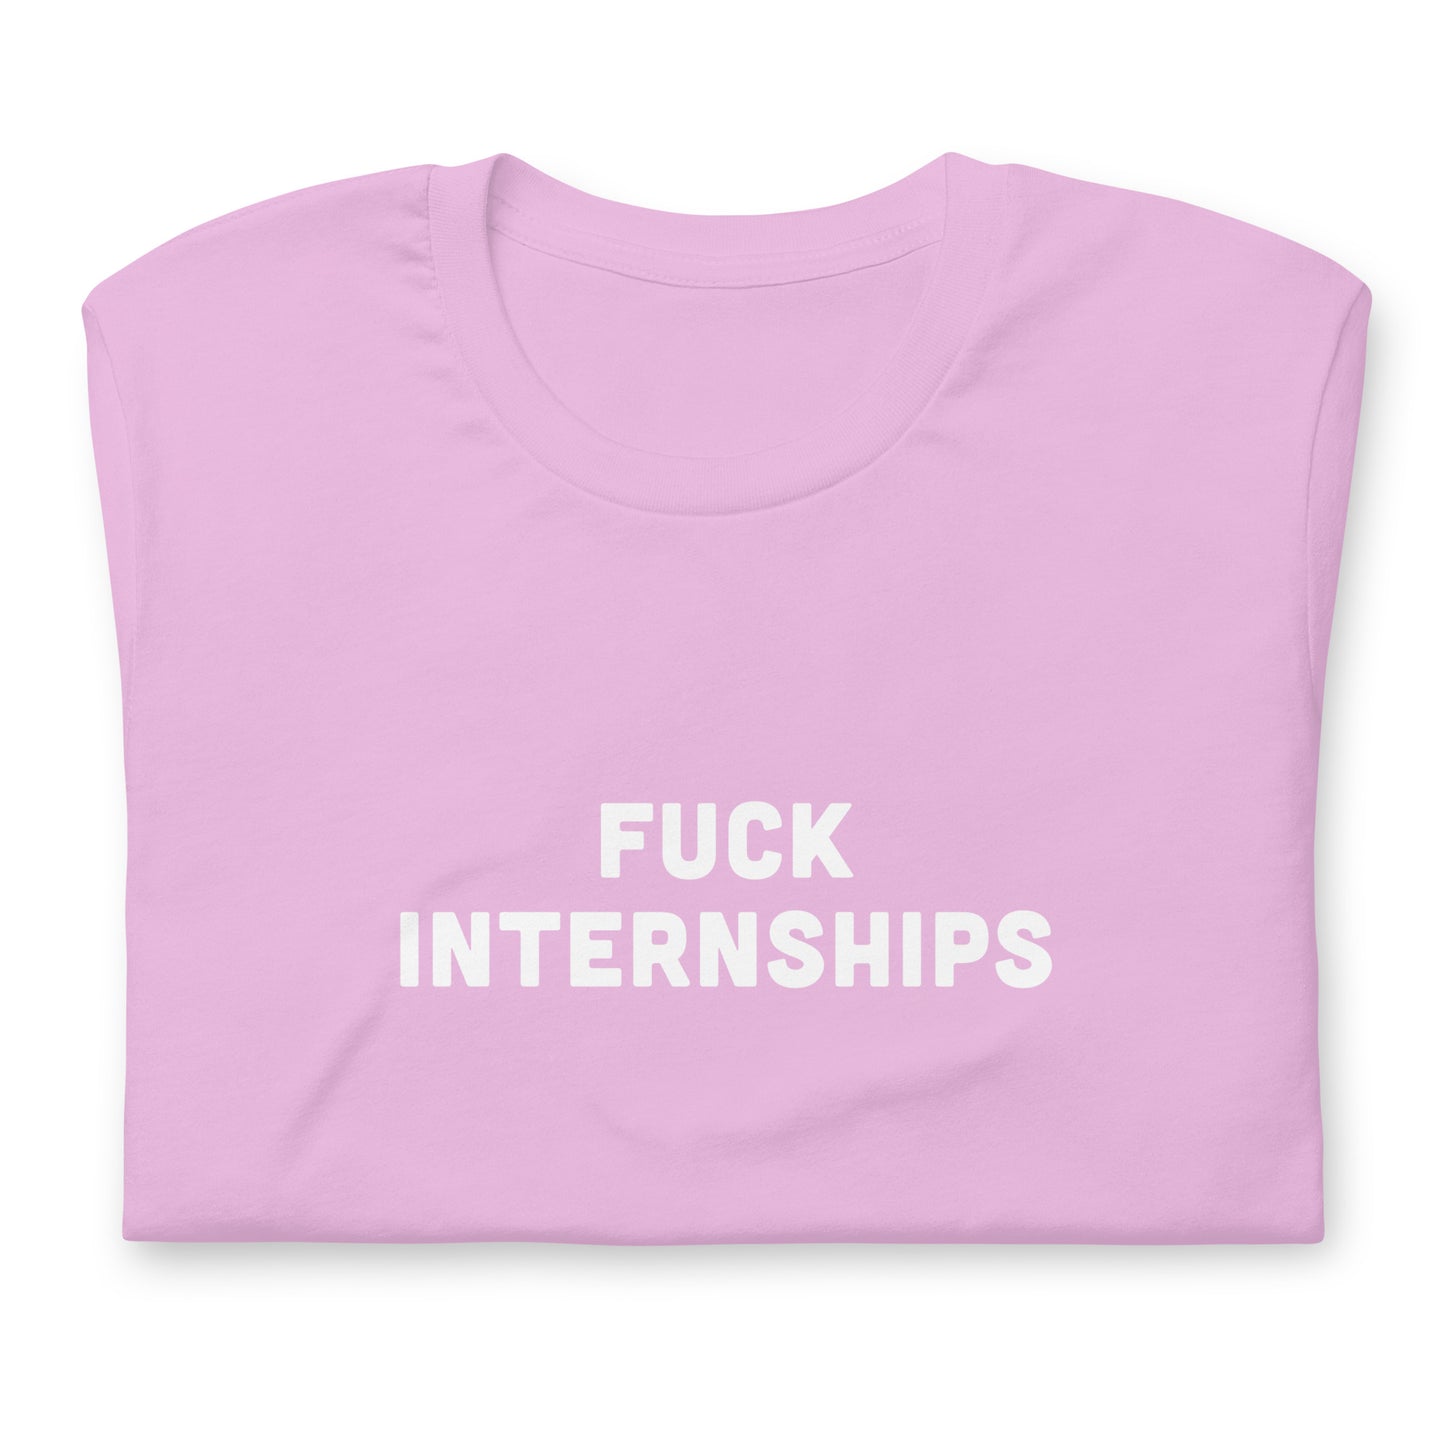 Fuck Interships T-Shirt Size 2XL Color Forest